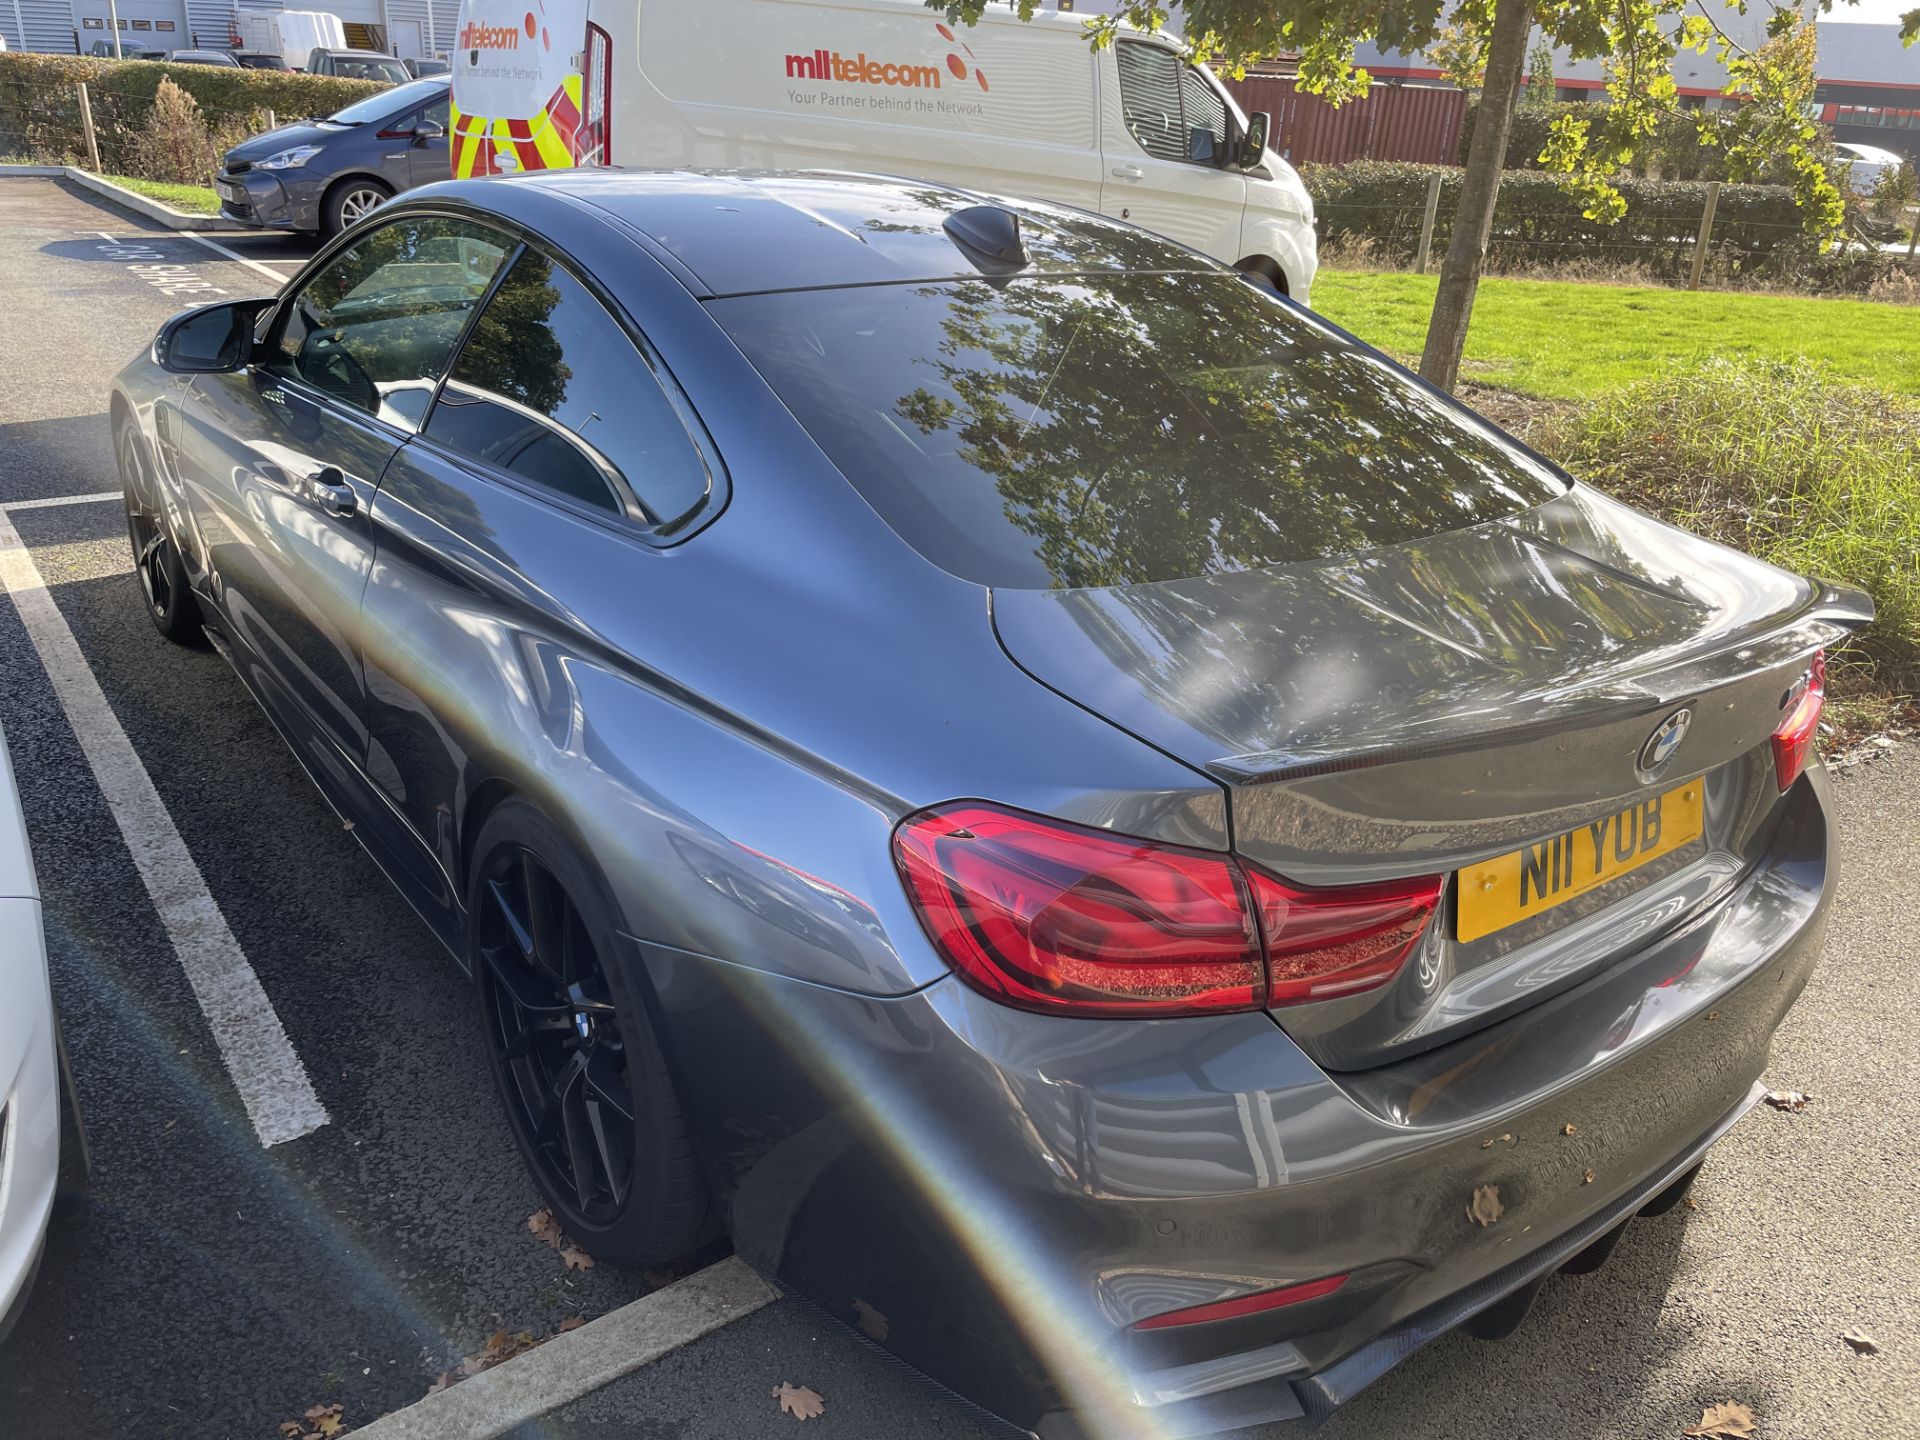 BMW M4 S-A 3.0 Petrol Automatic Two Door Coupe Converted Into Track CarRegistration Number N11 YOB - Image 6 of 16